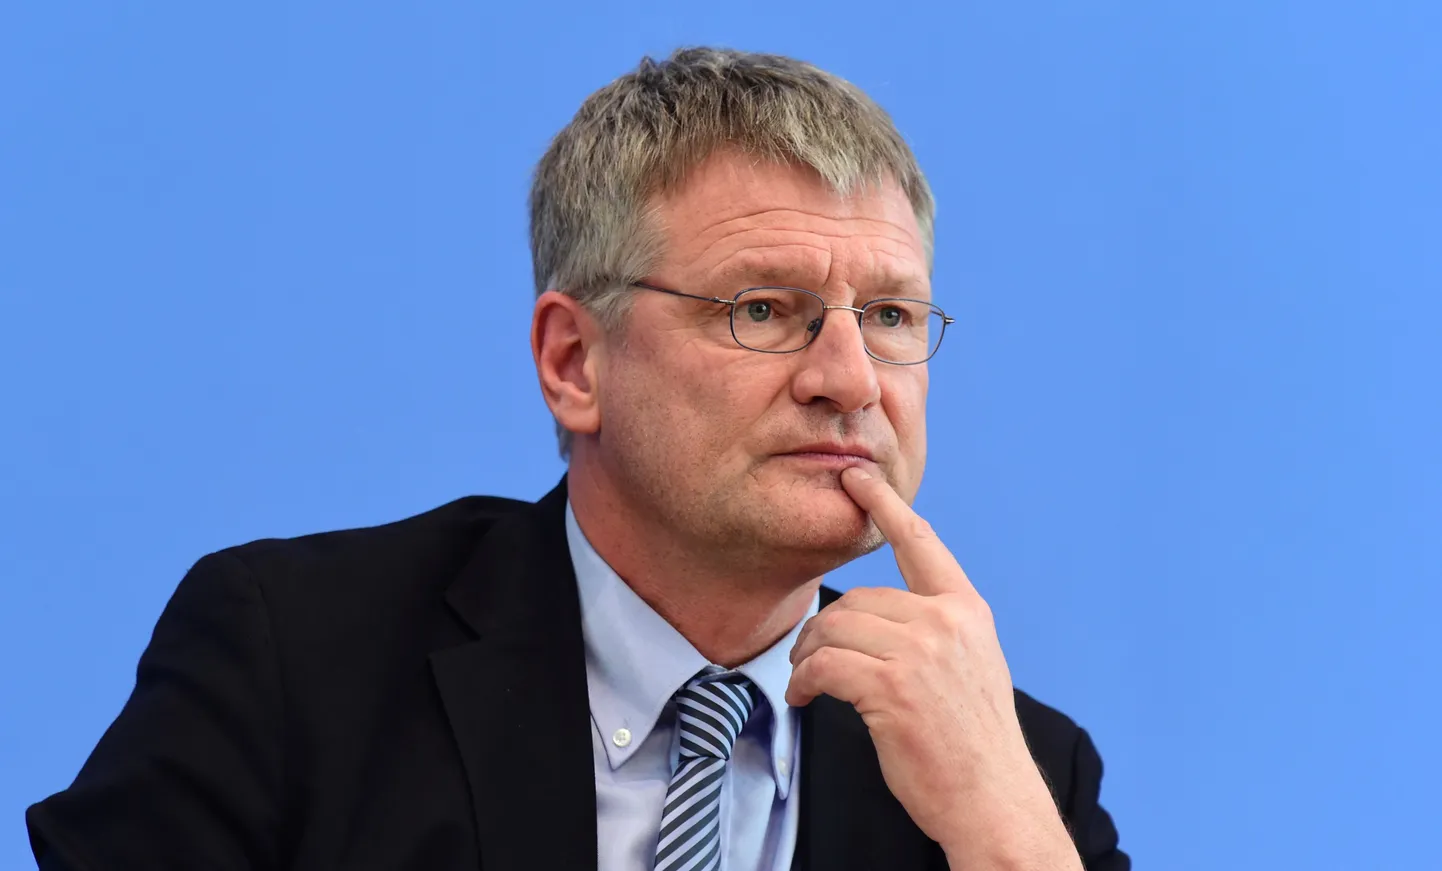 Right-wing populist Alternative for Germany (AfD) main-candidate in Baden-Wuerttemberg Joerg Meuthen attends a press conference in Berlin, on March 14, 2016 a day after election in three regional states. 
In Sunday's vote, the AfD captured seats into all three states and gained as much as one in four votes in the eastern state of Saxony-Anhalt, emerging as the second biggest party. In Rhineland-Palatinate, it rose to become the third largest. / AFP PHOTO / John MACDOUGALL